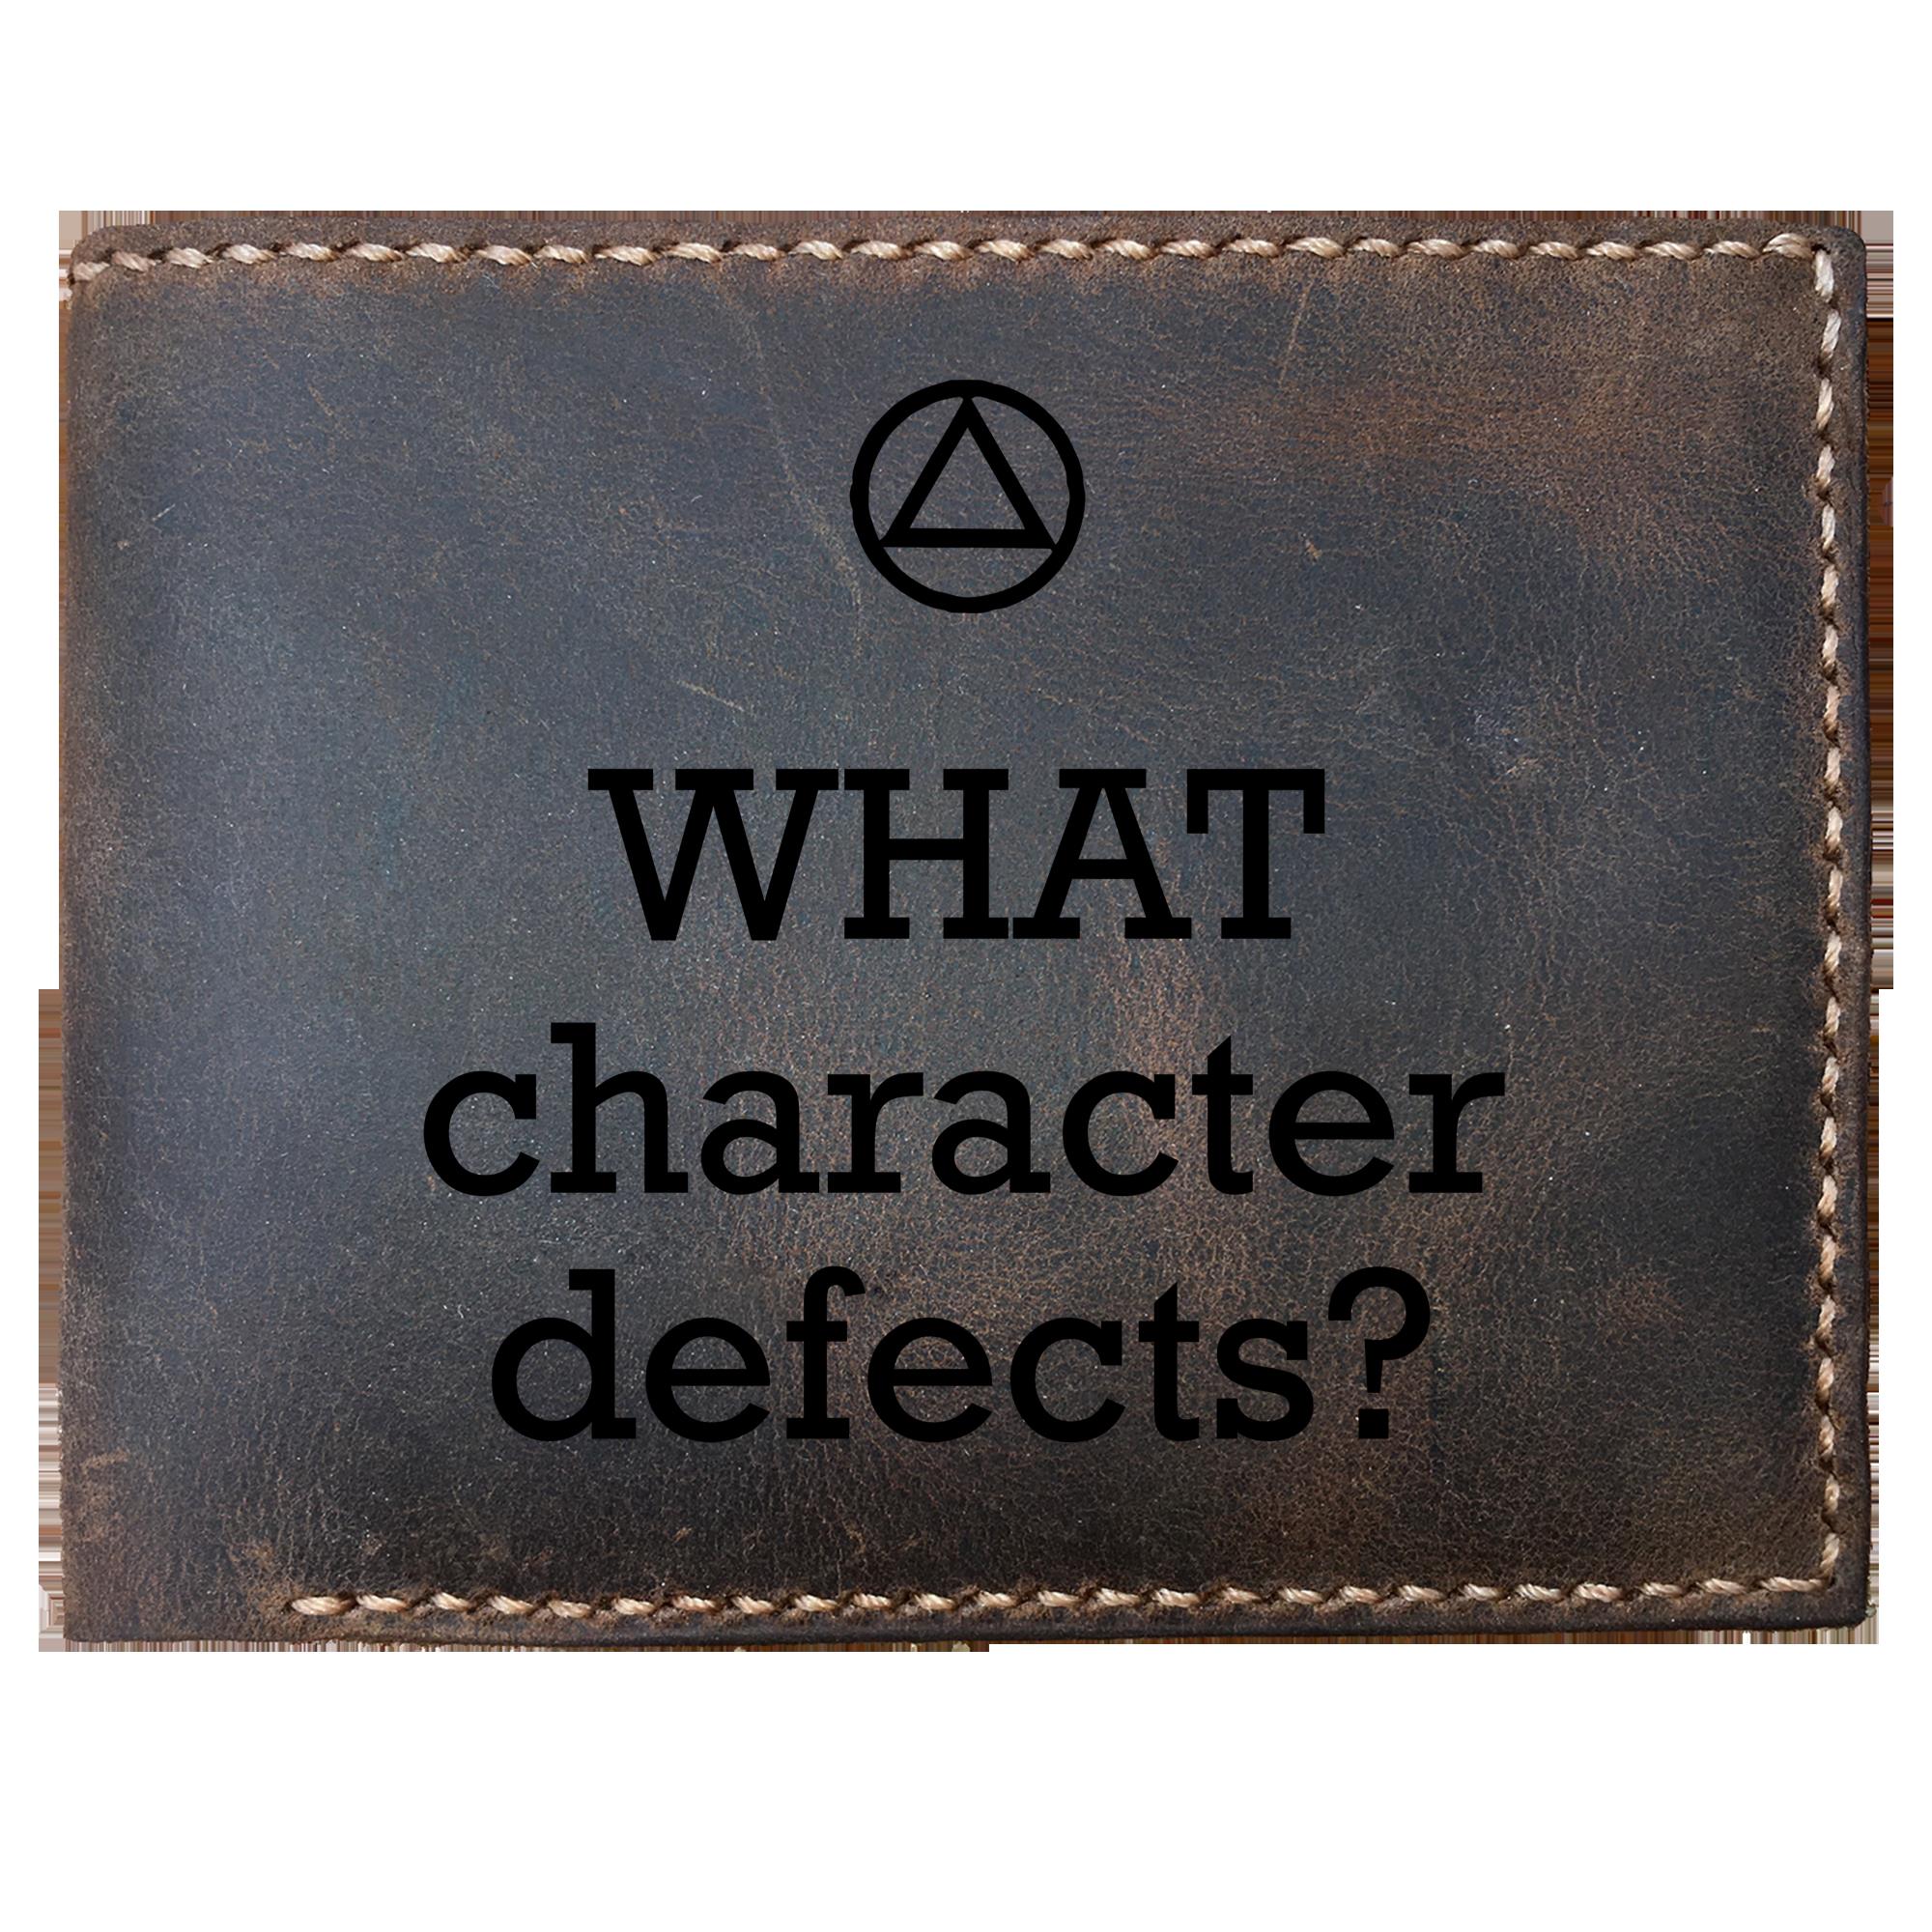 Skitongifts Funny Custom Laser Engraved Bifold Leather Wallet For Men, What Character Defects Funny Alcoholics Anonymous Recovery Slogan